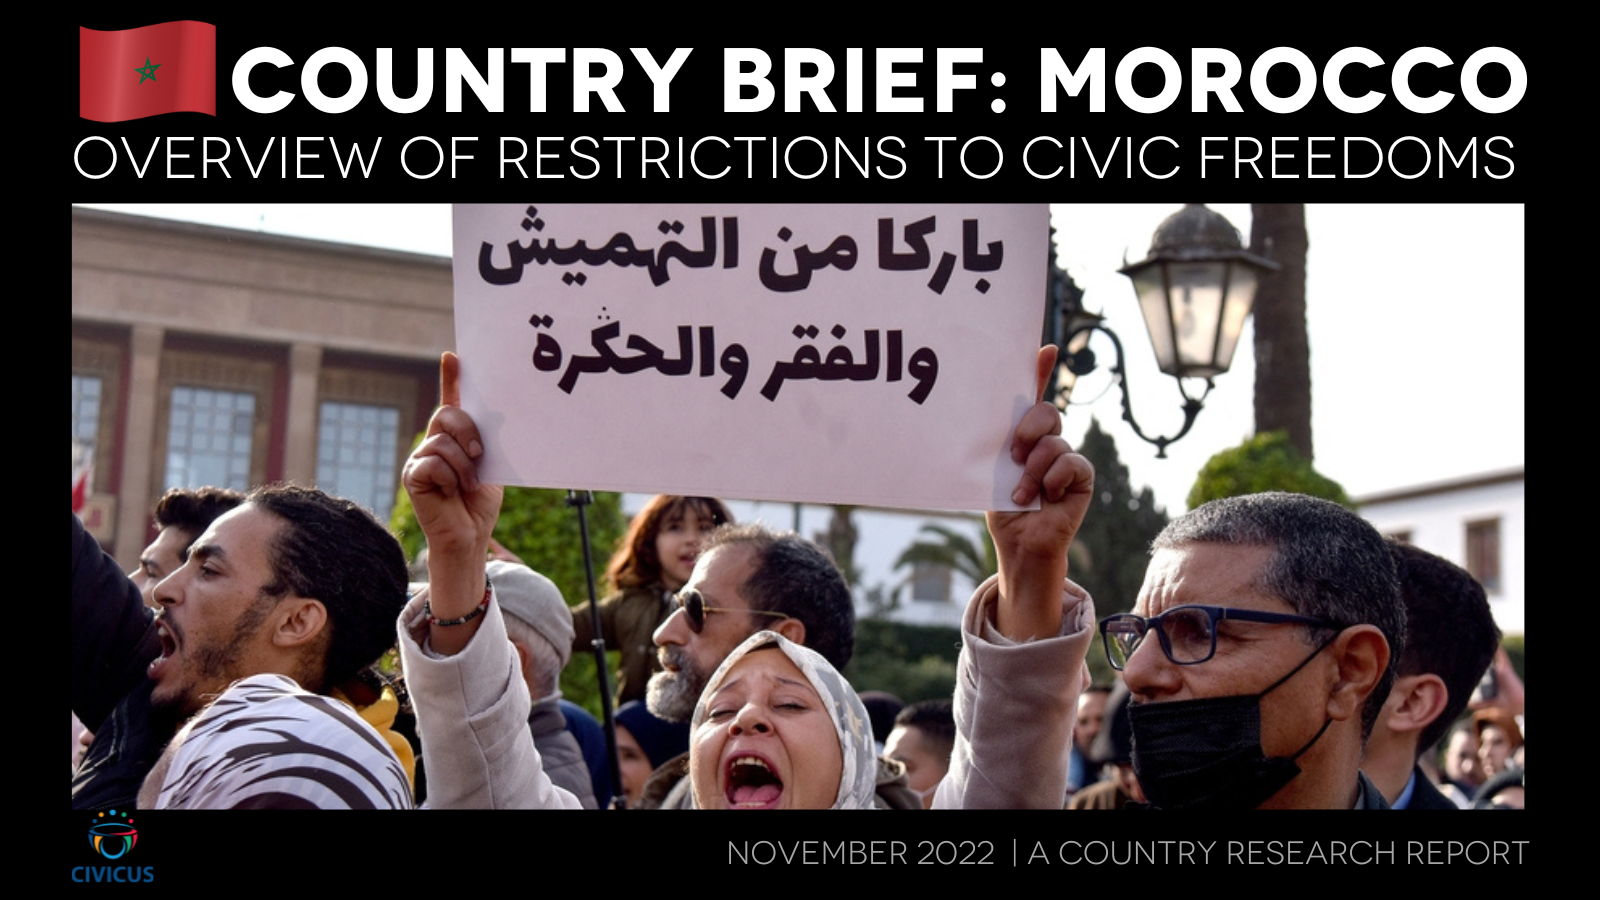 New report documents restrictions to civic freedoms in Morocco